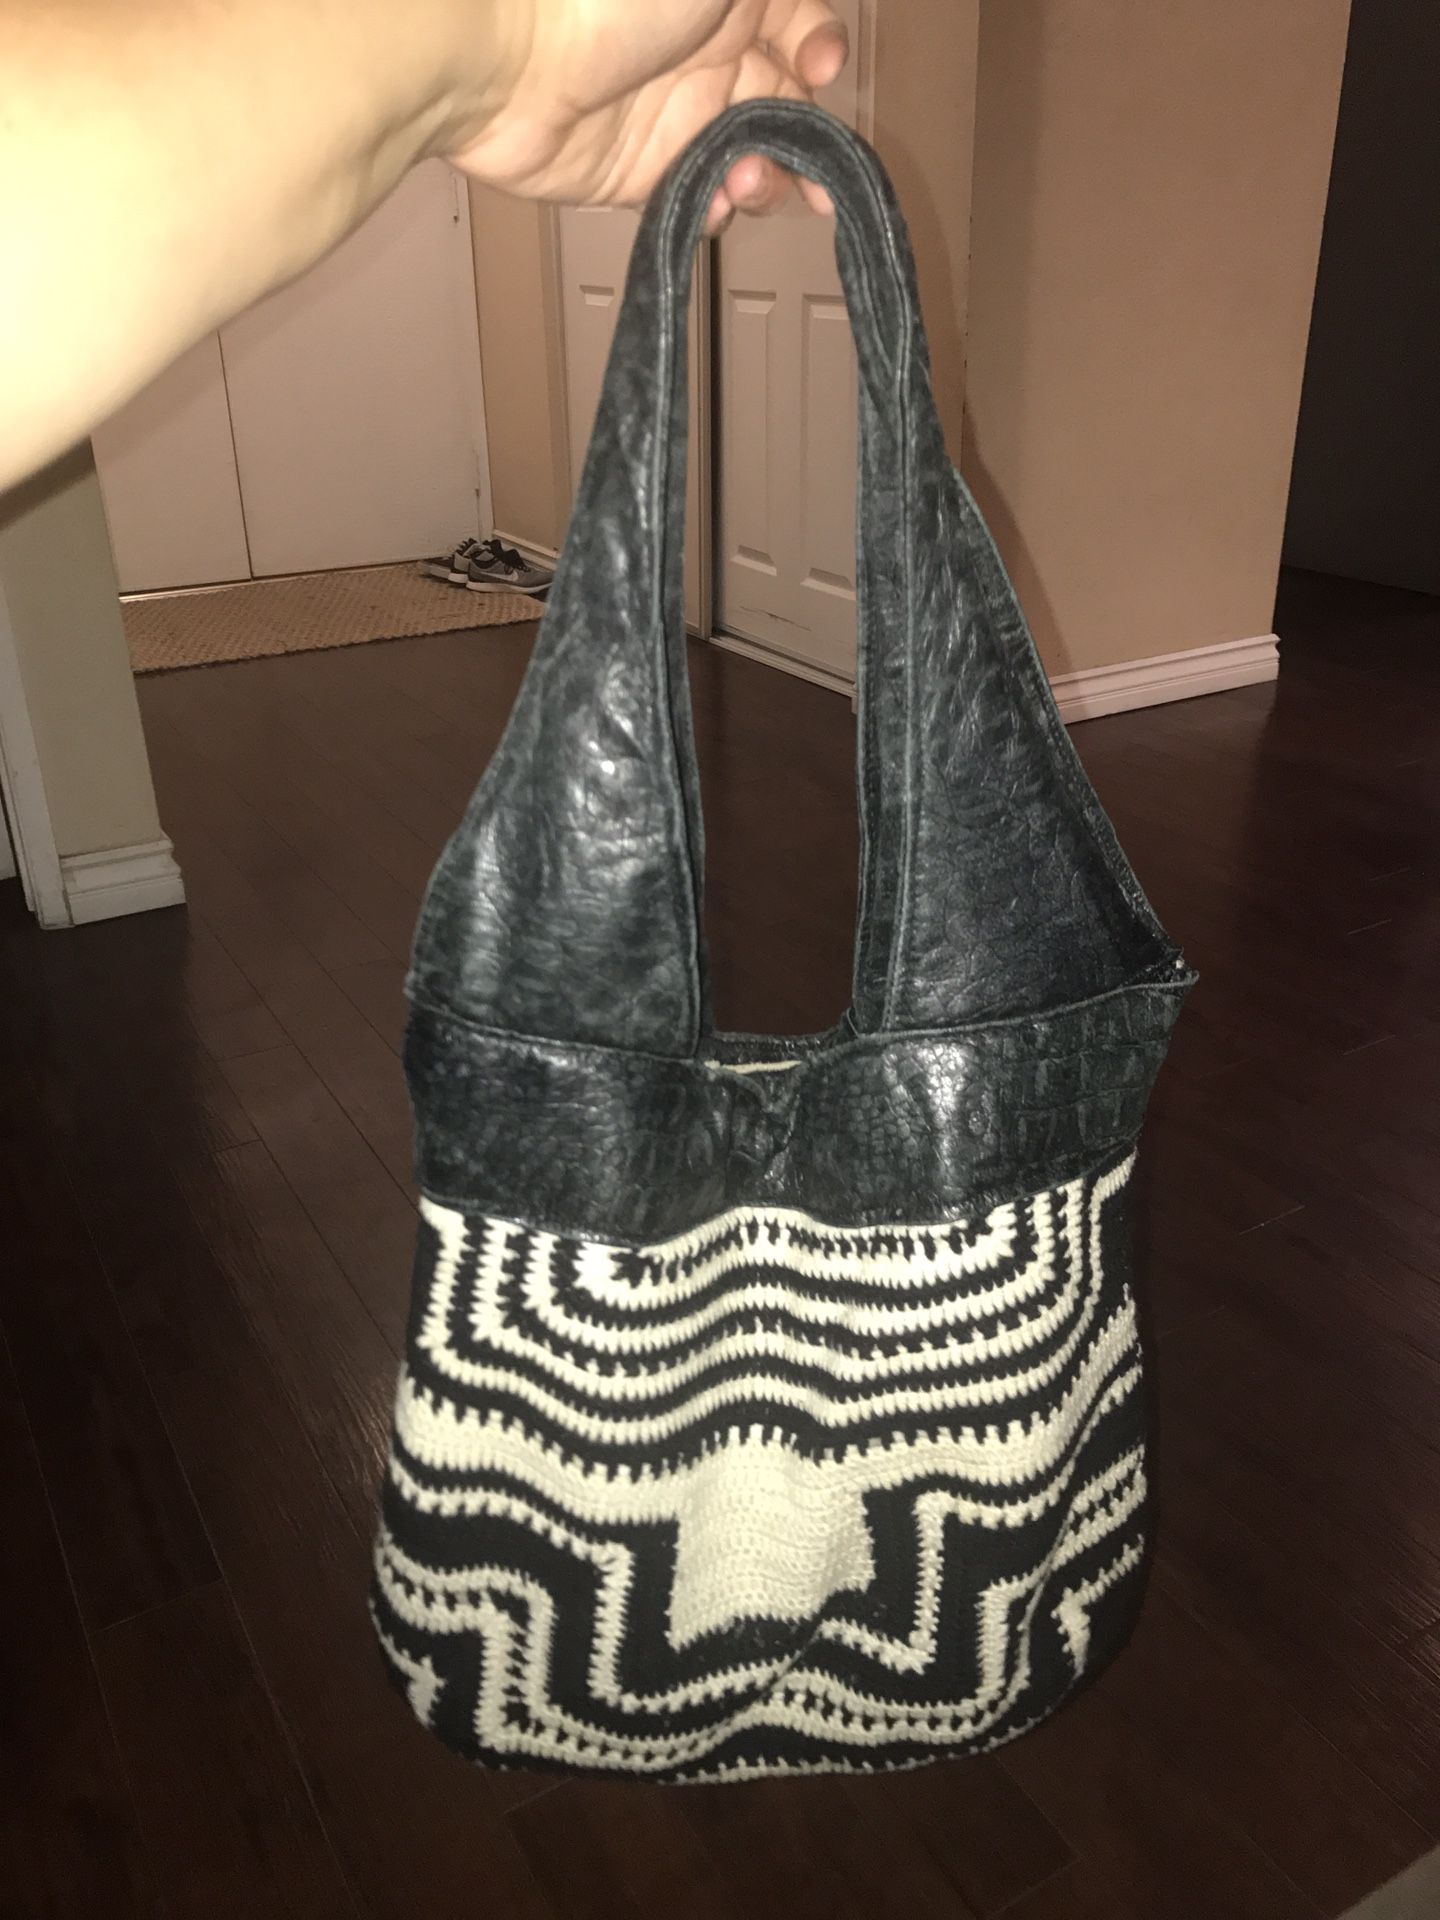 Leather bag -normal wear for Sale in Fontana, CA - OfferUp